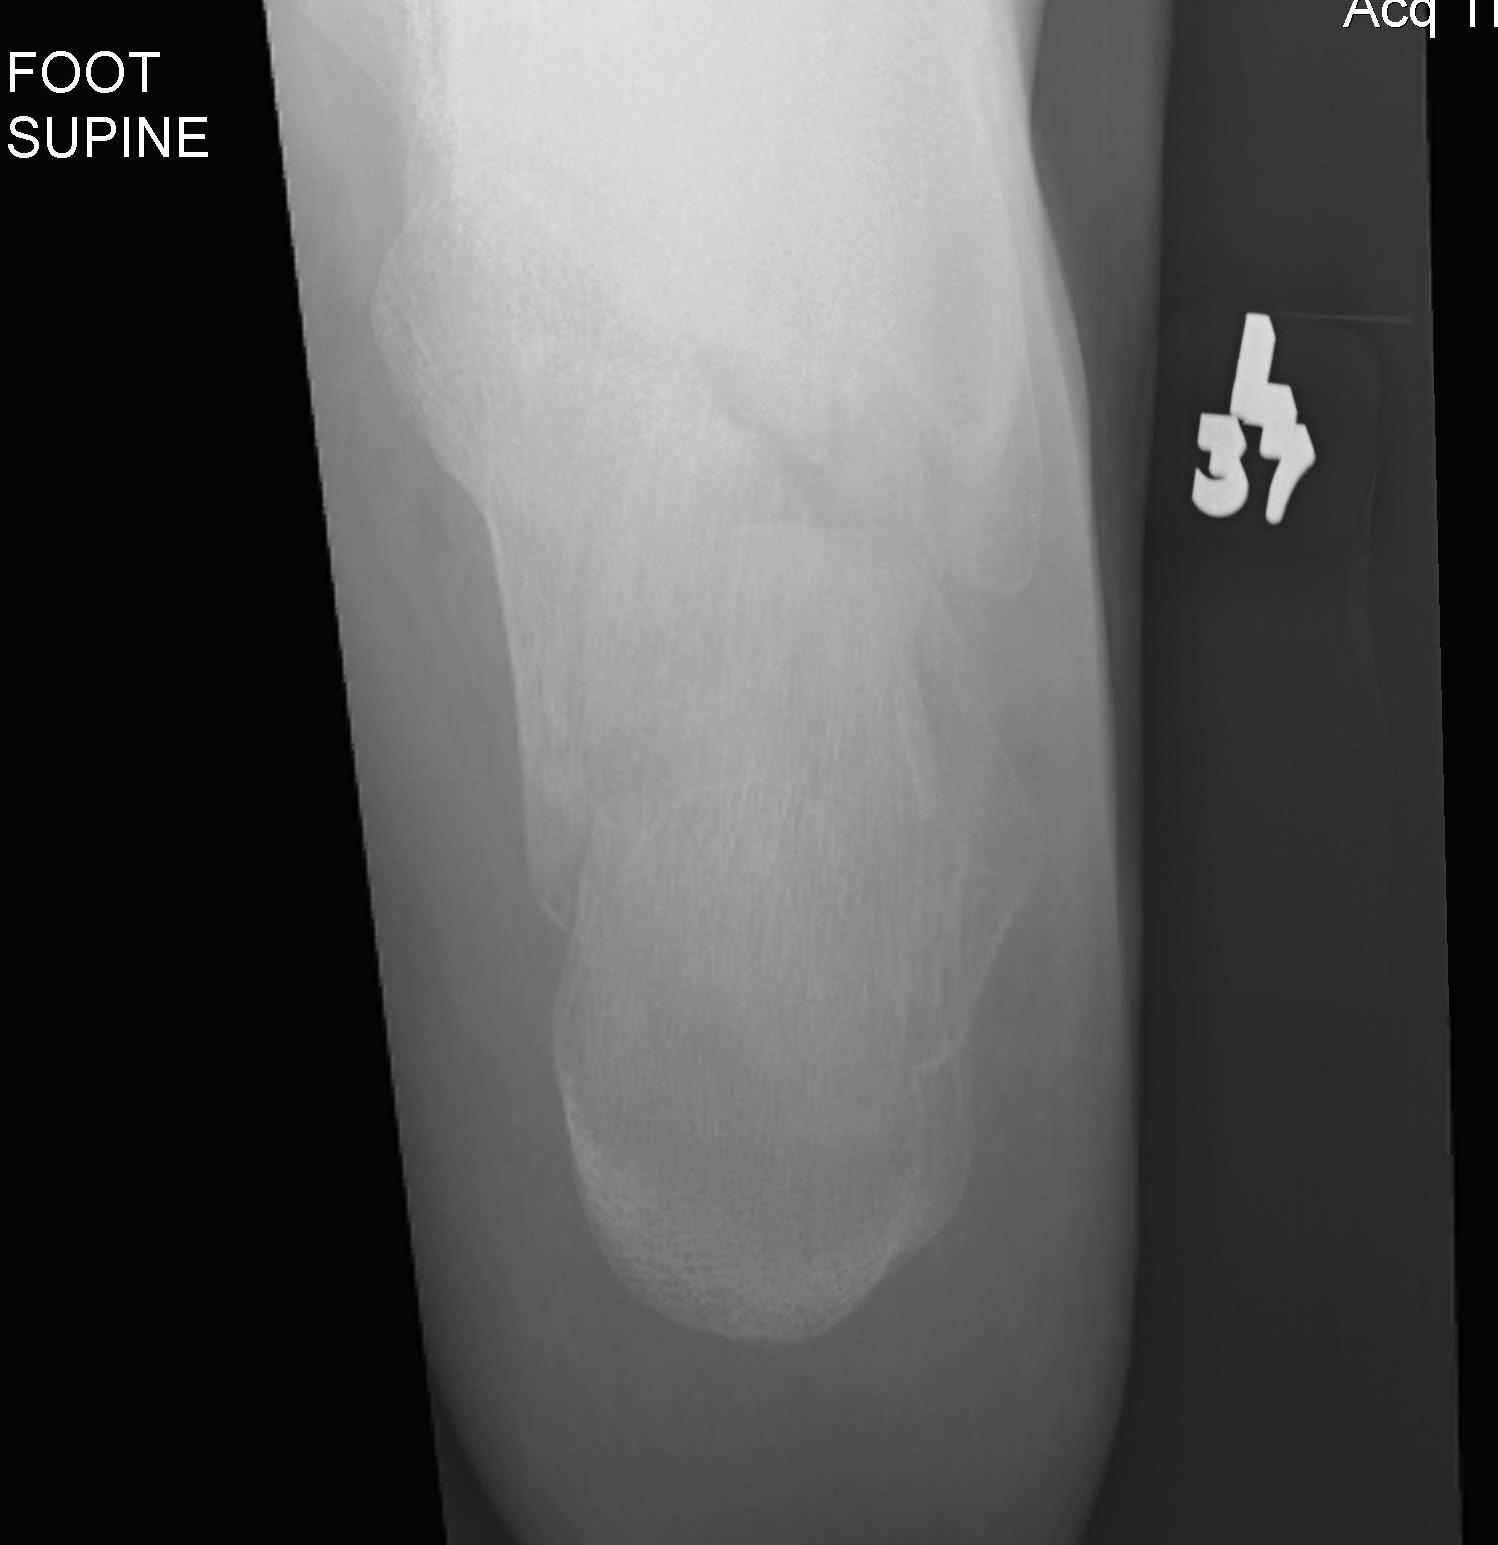 Calcaneal Fracture Harris Axial View